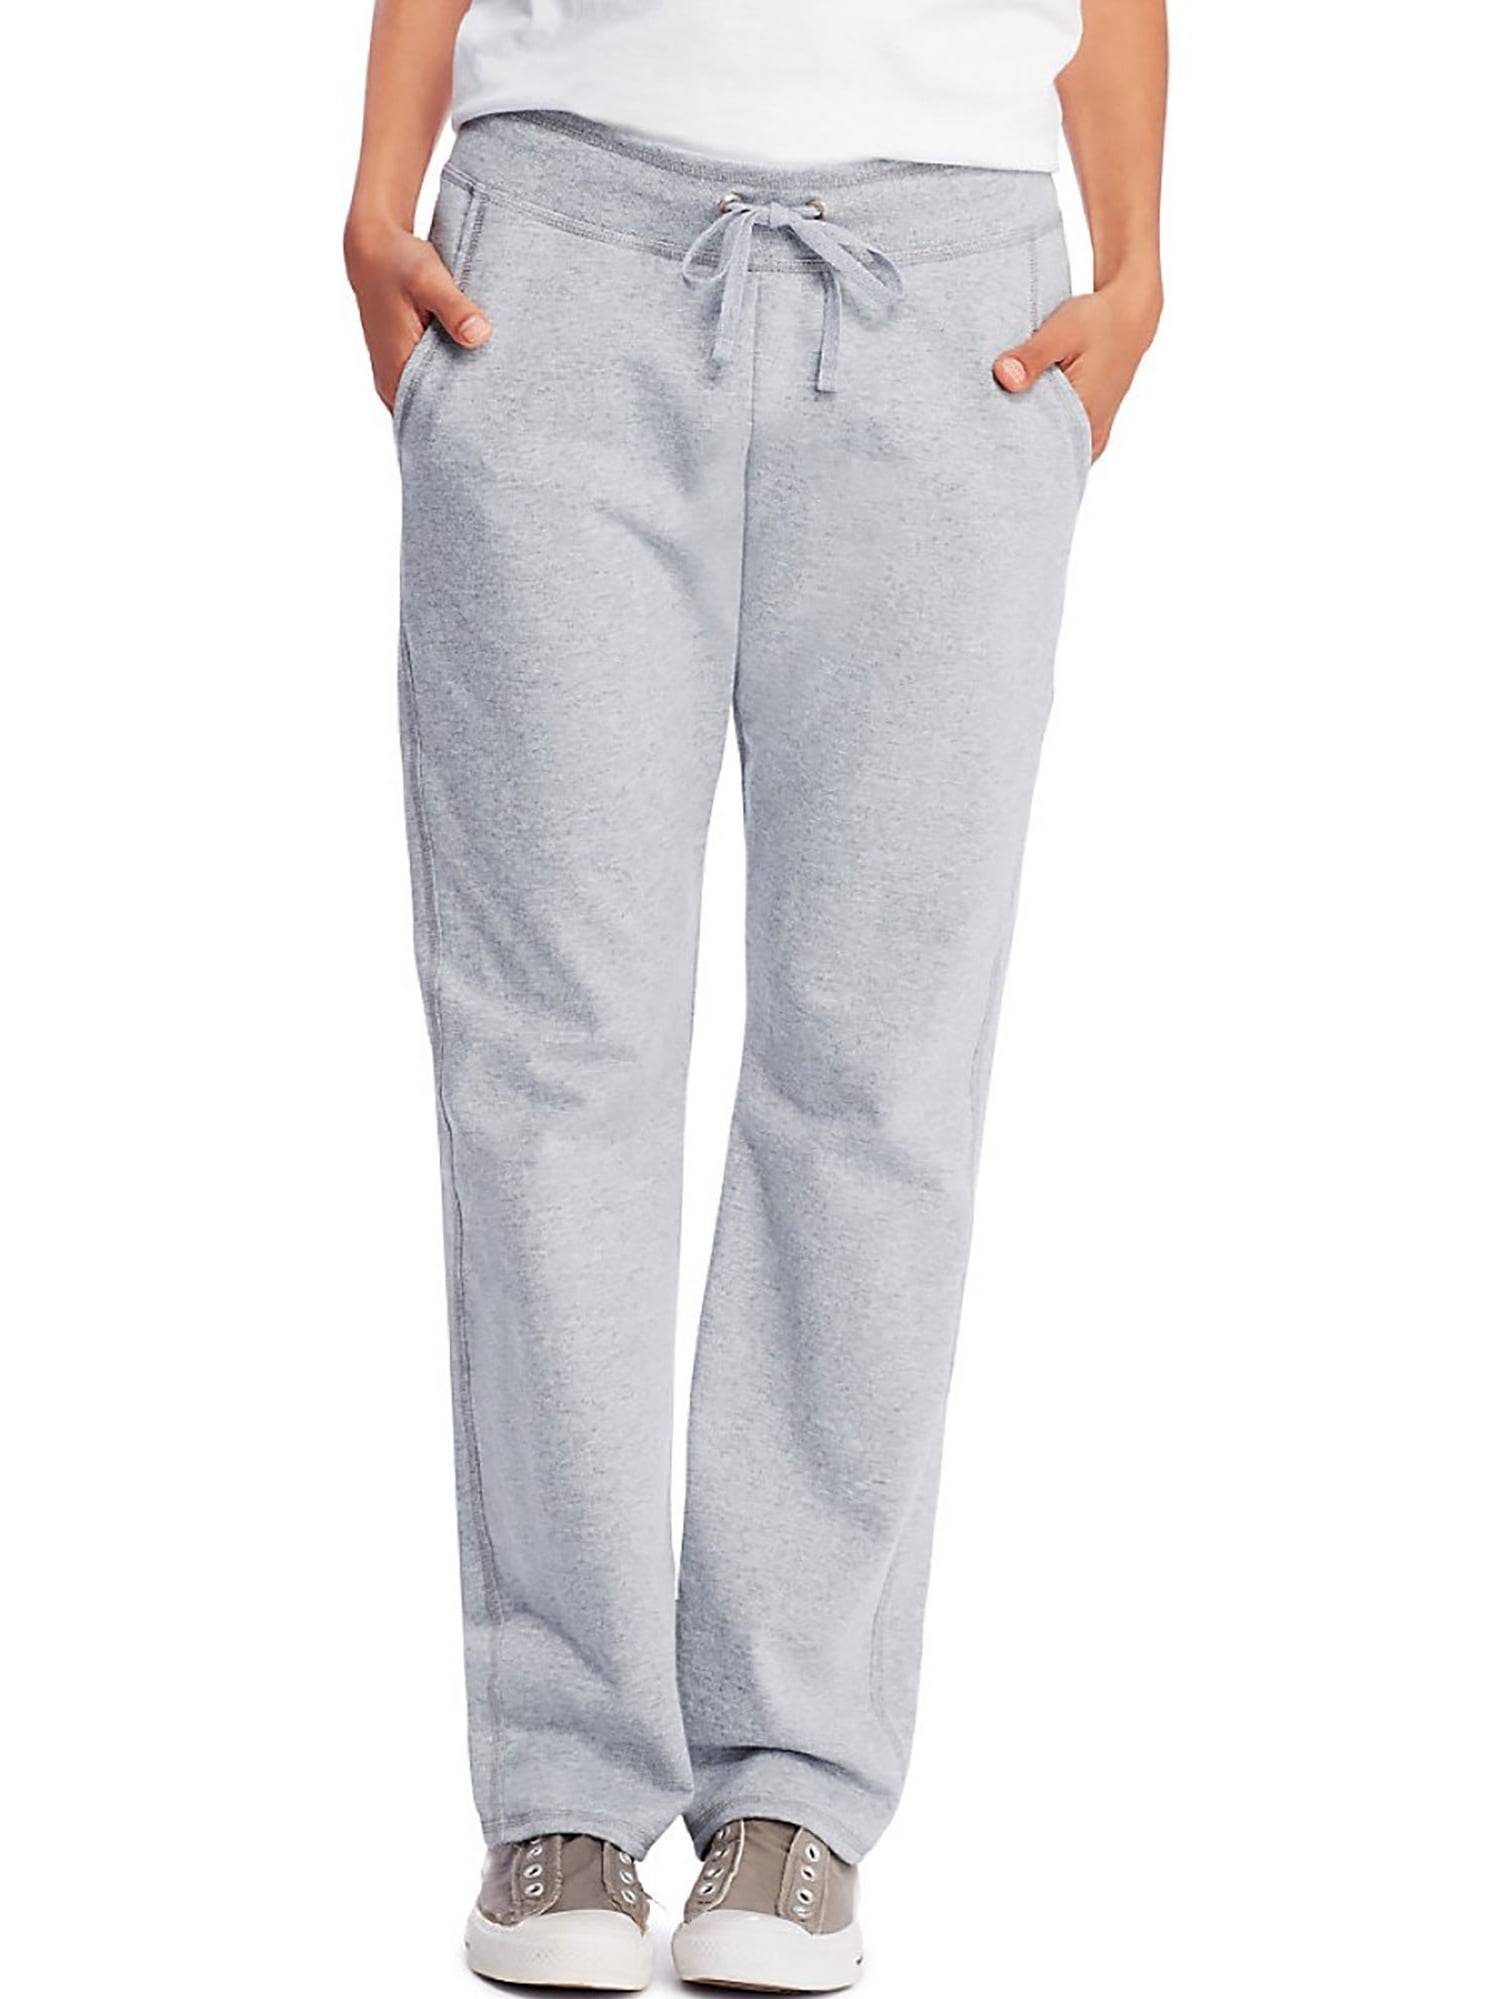 Hanes Women's French Terry Pocket Pant, Style O4677 - Walmart.com